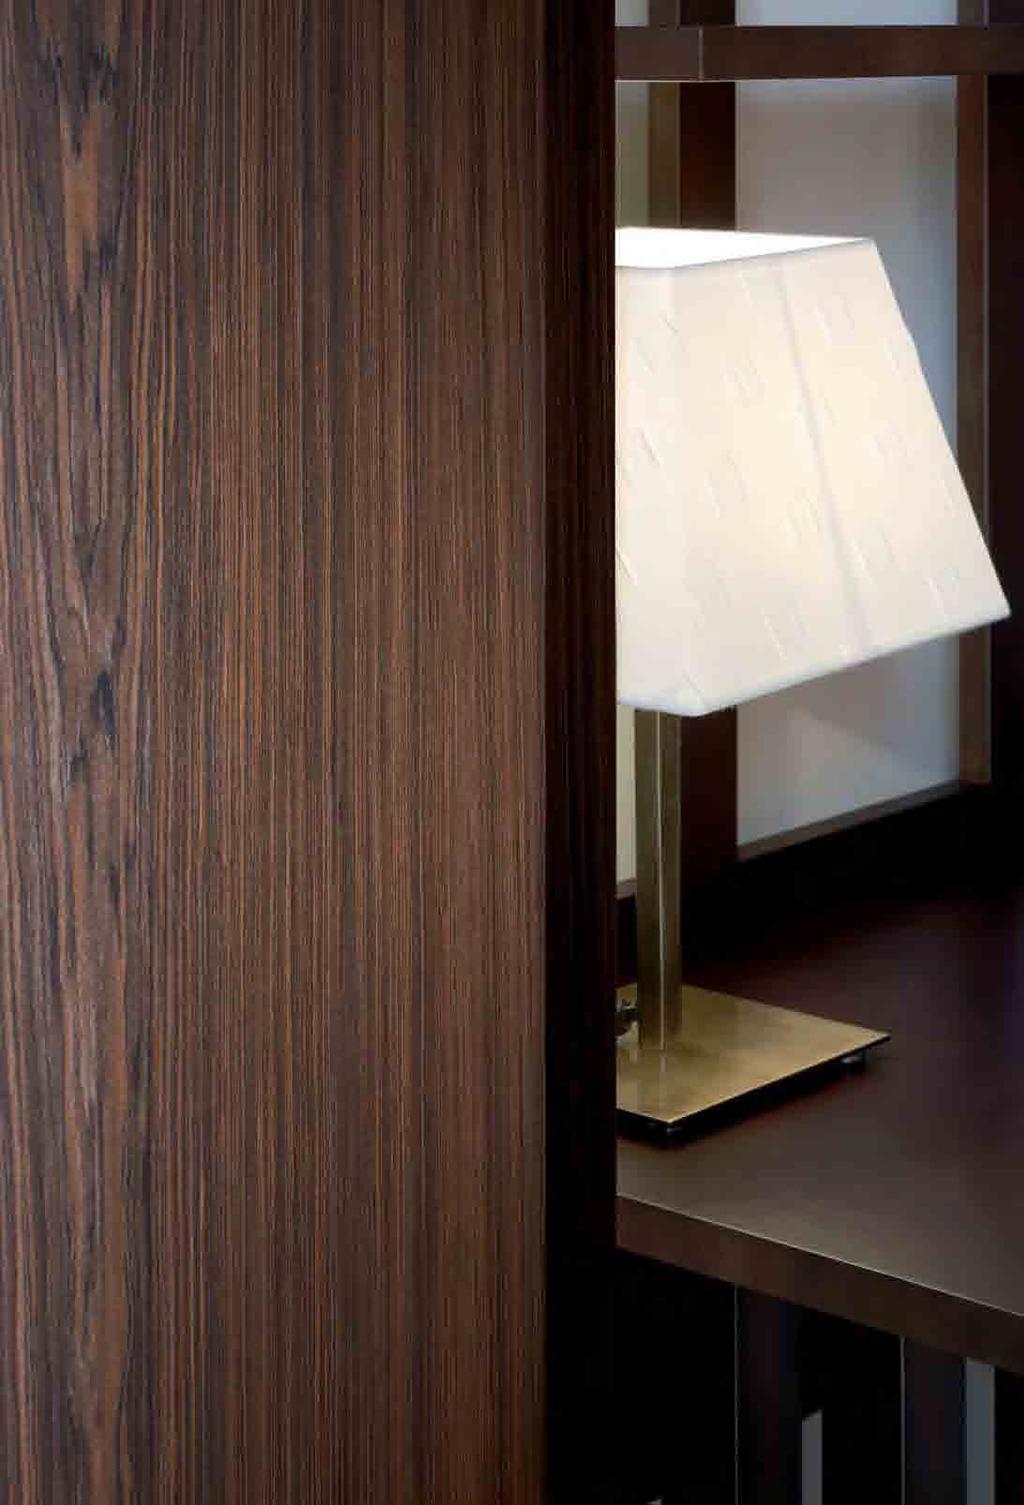 more than a conventional veneer Formica Ligna is a decorative laminate which incorporates a real wood veneer.